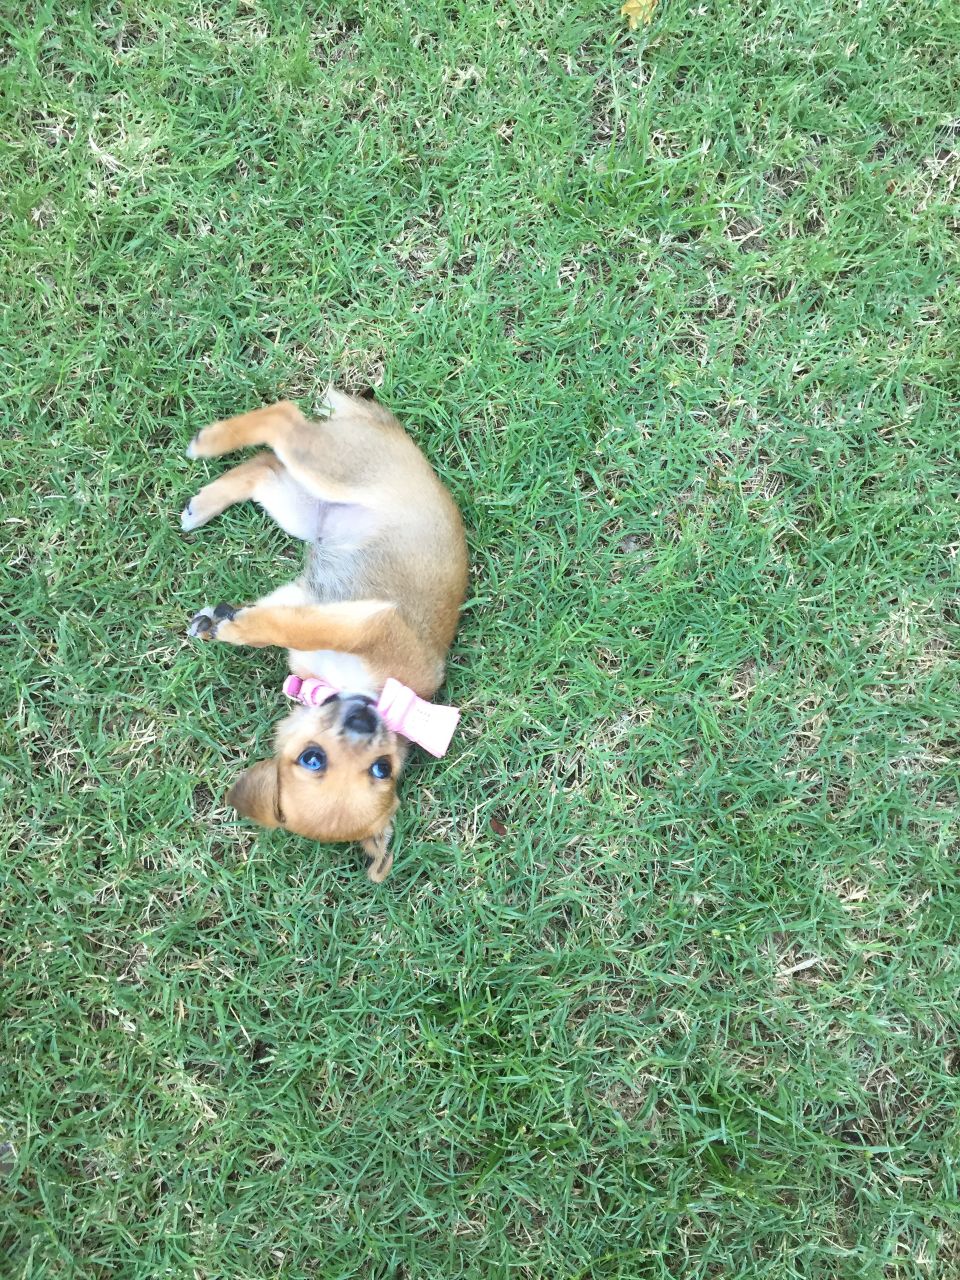 A 6 Week Old Puppy Not Very Sure What That Is In The Corner Of Her Eye Creepily Looking At Something In The Grass Haha